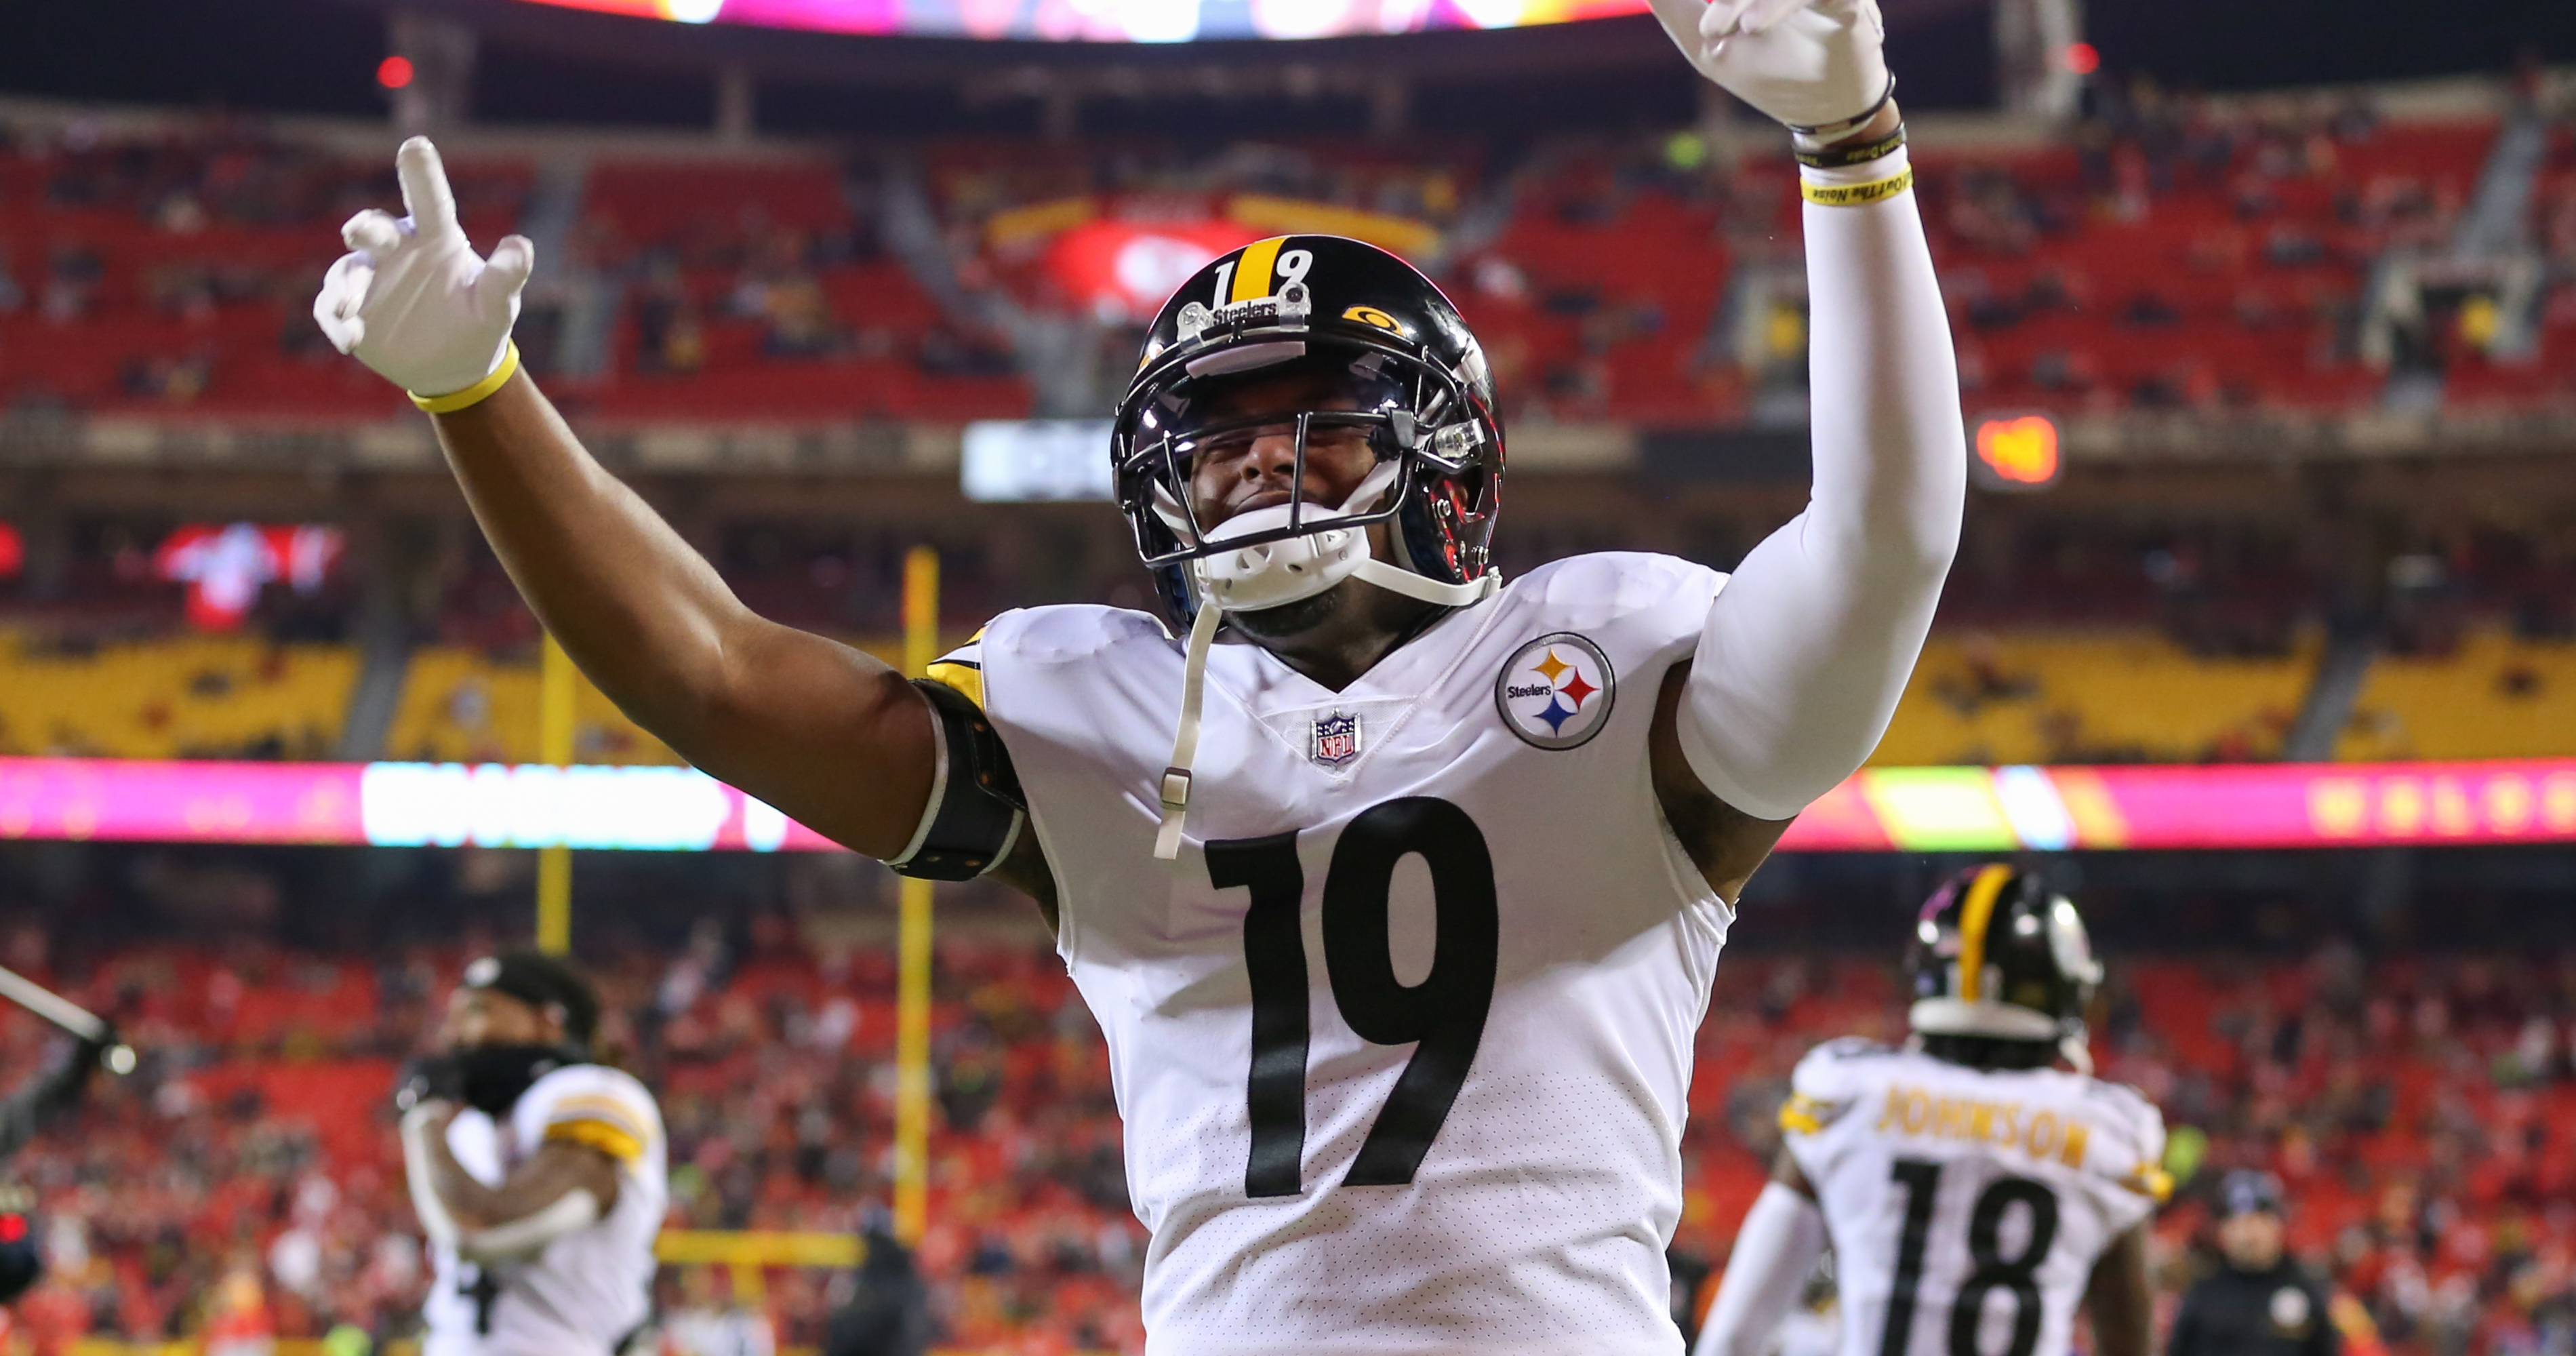 Could JuJu Smith-Schuster leave the Steelers for Chiefs in free